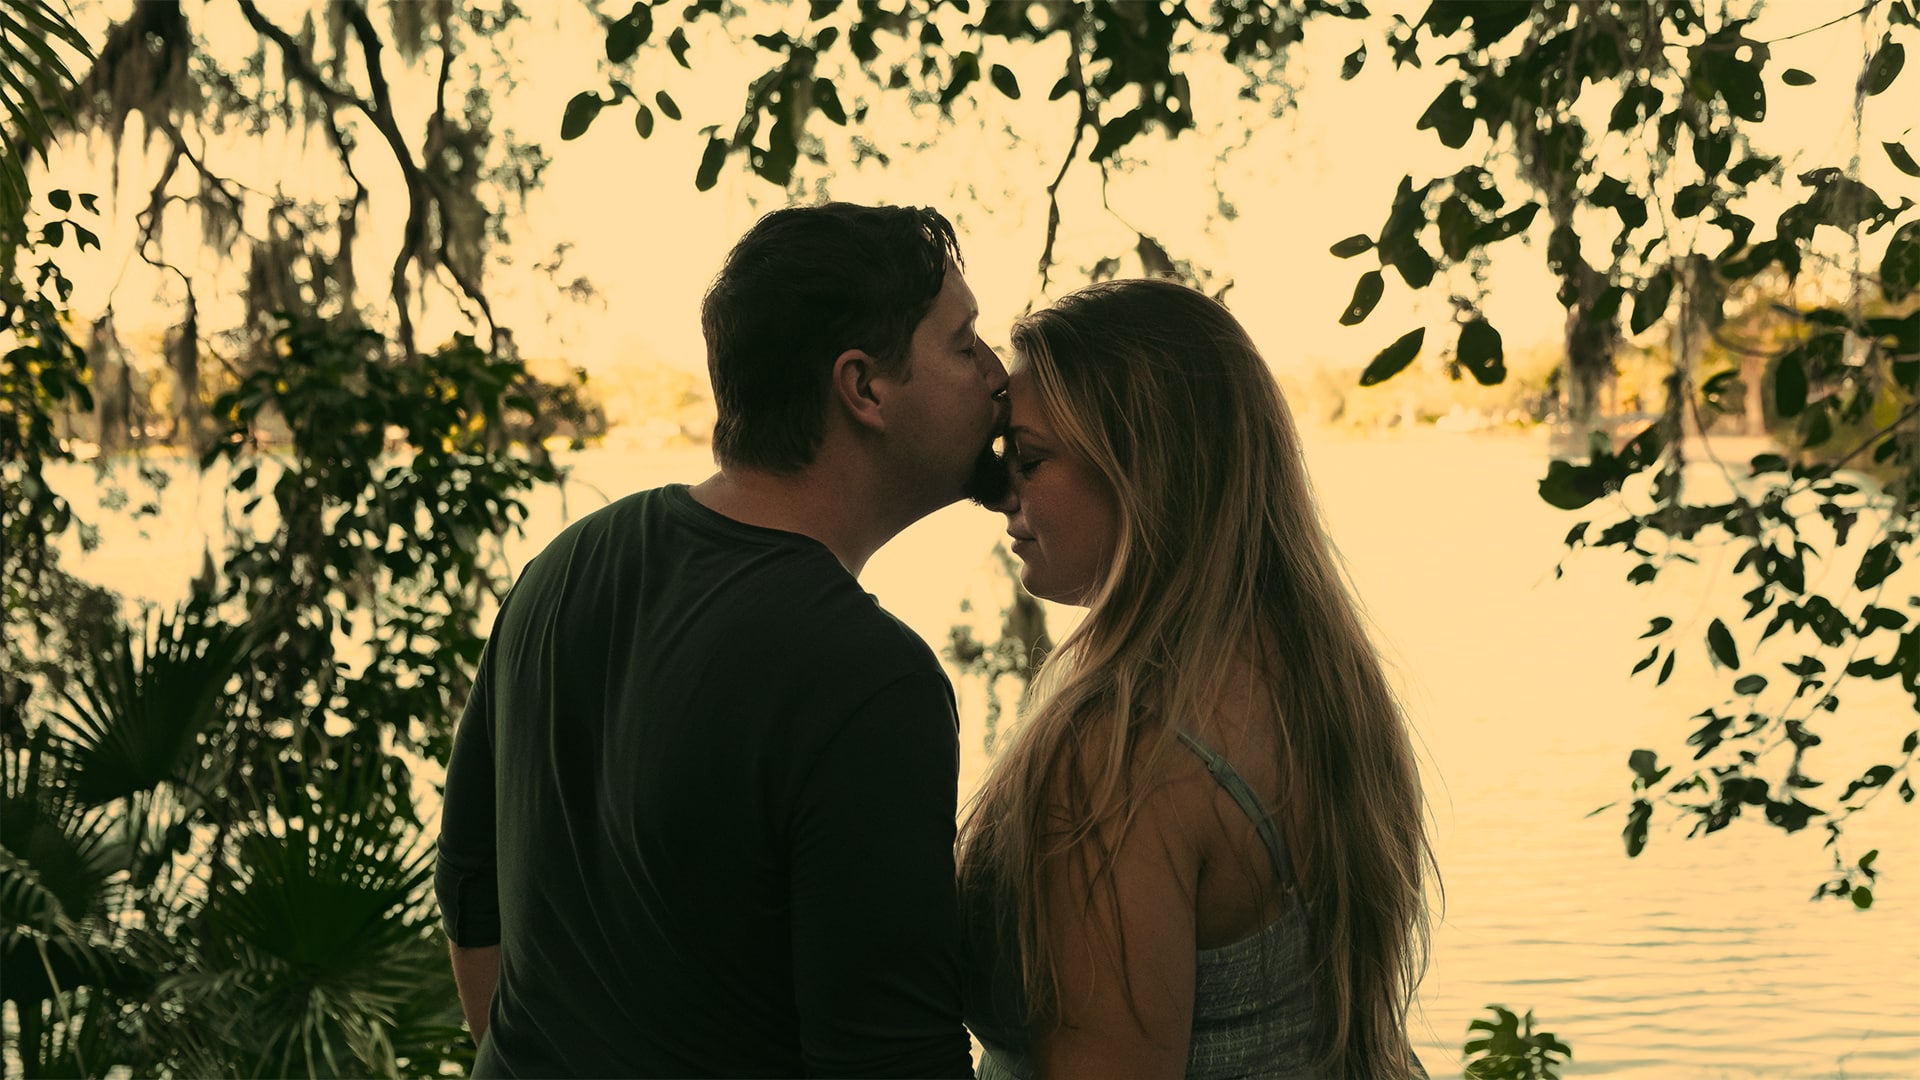 man leans over and kisses woman on forehead with body of water behind them and greenery surrounding them